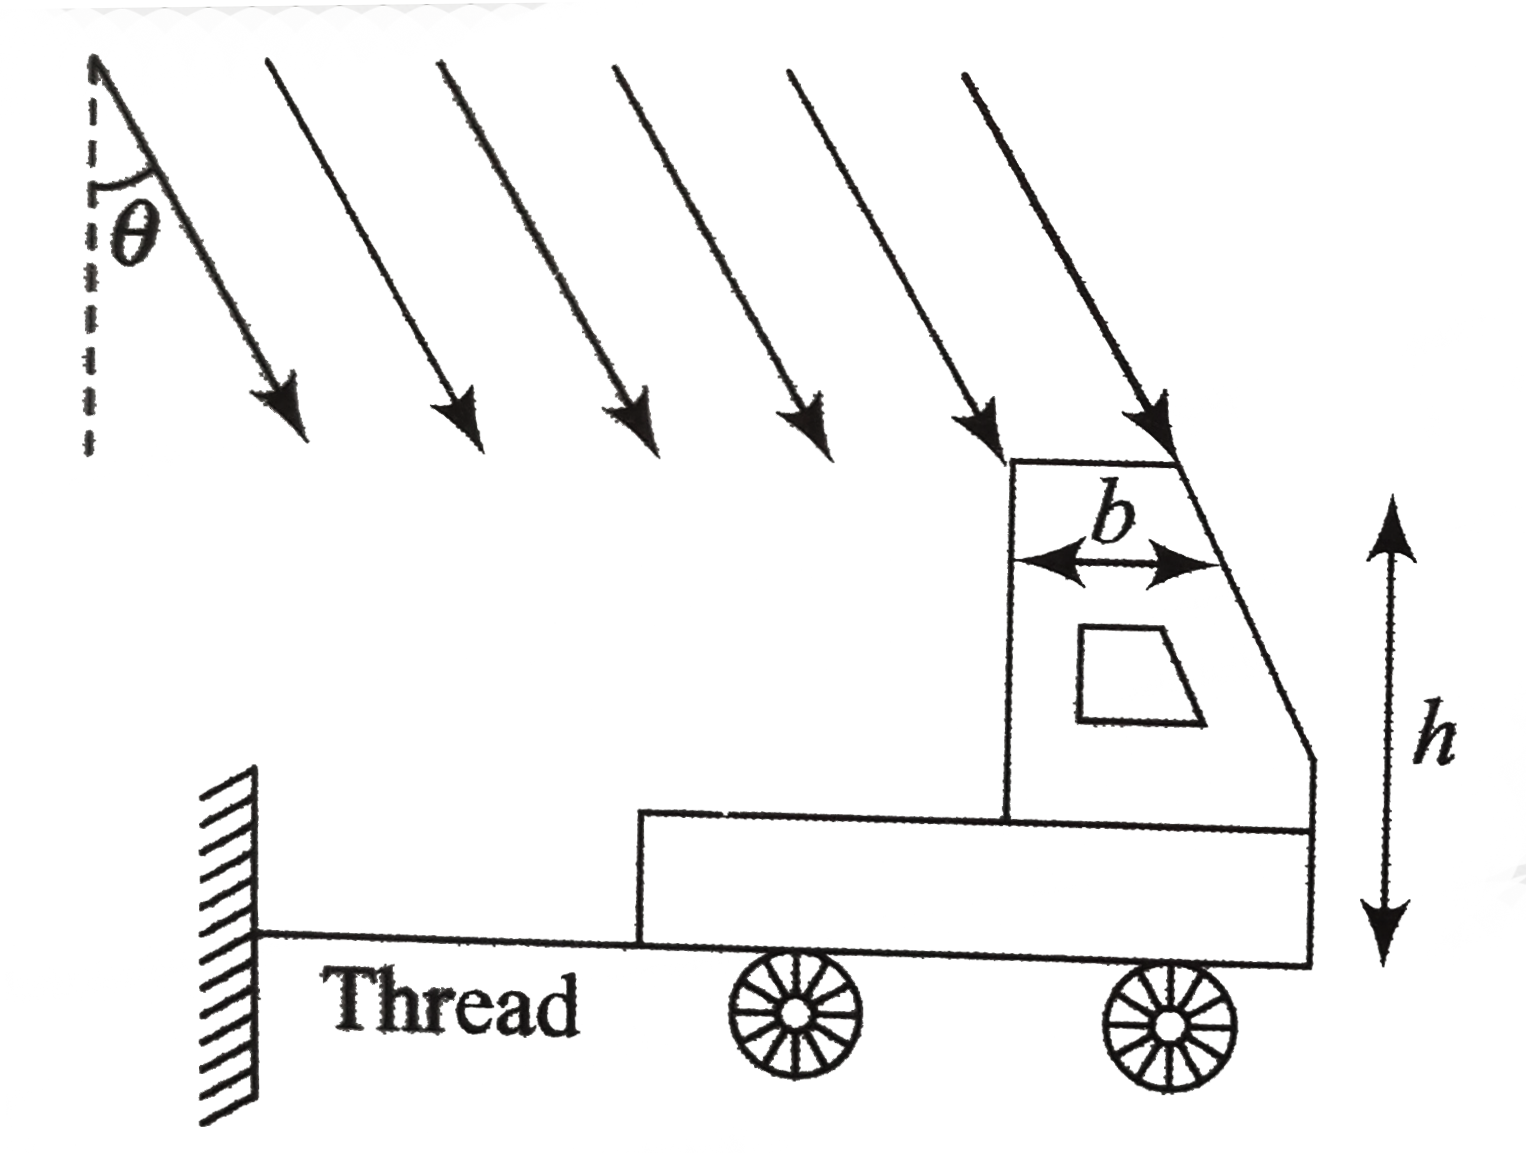 A toy truck has dimensions as shown in fig. and its width, normal to the plane of this paper, is d. The sun rays are incident on it as shiwn in the figure. If intensity of rays is I and all surfaces of truck are perfectly black, calculate tension in the thread used to keep the truck stationary. Neglect friction.